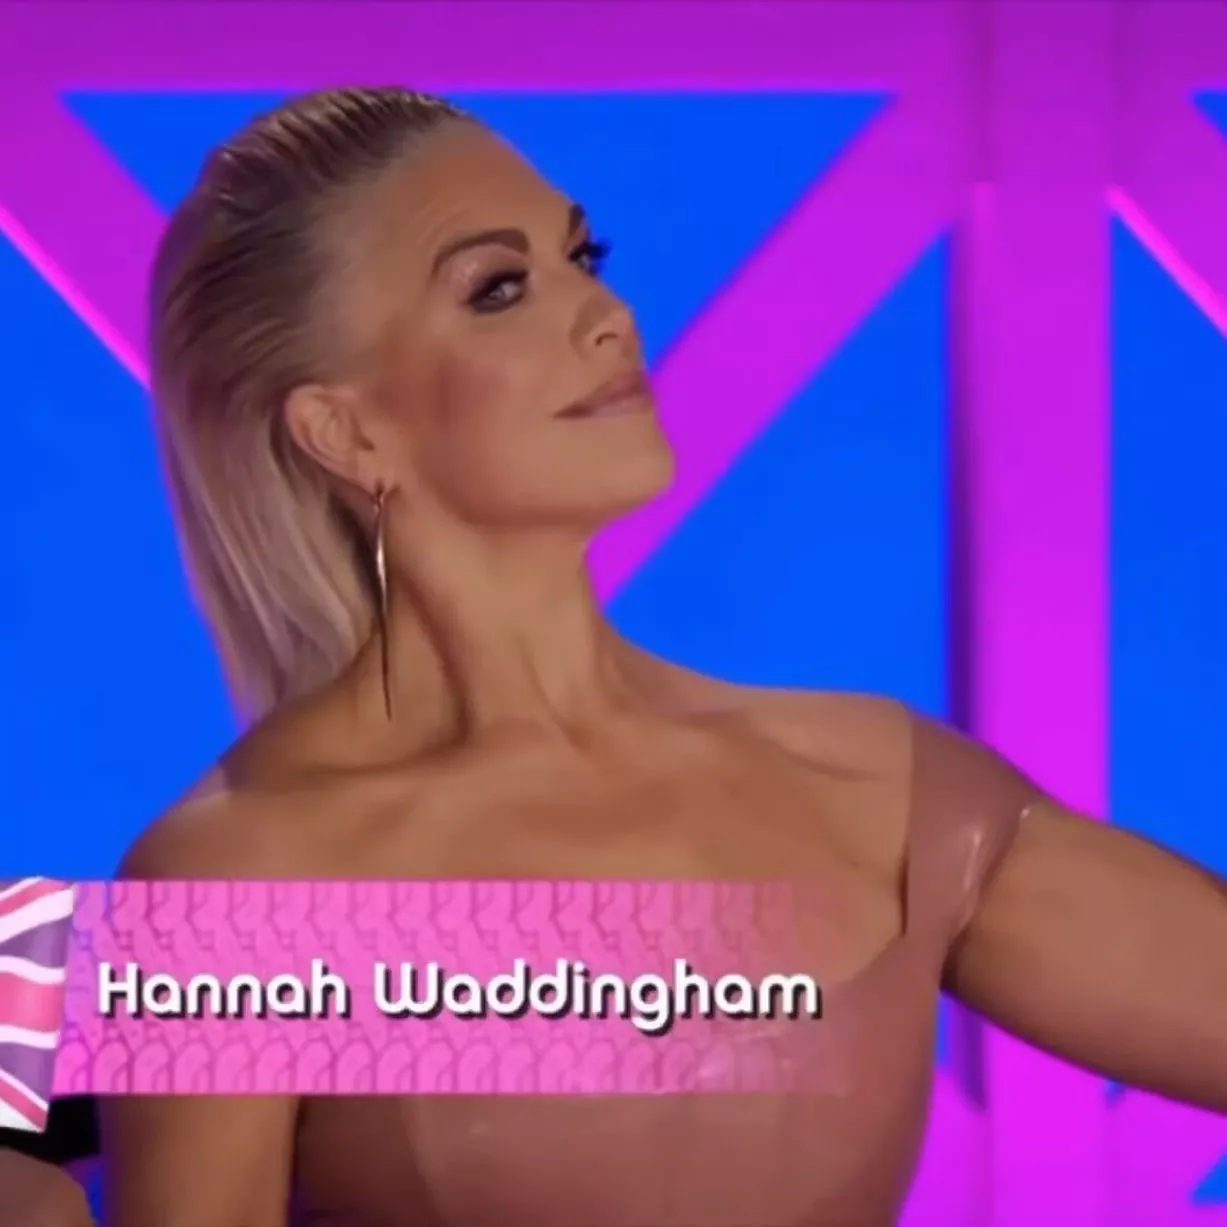 Hanna Waddingham Nude asked questions